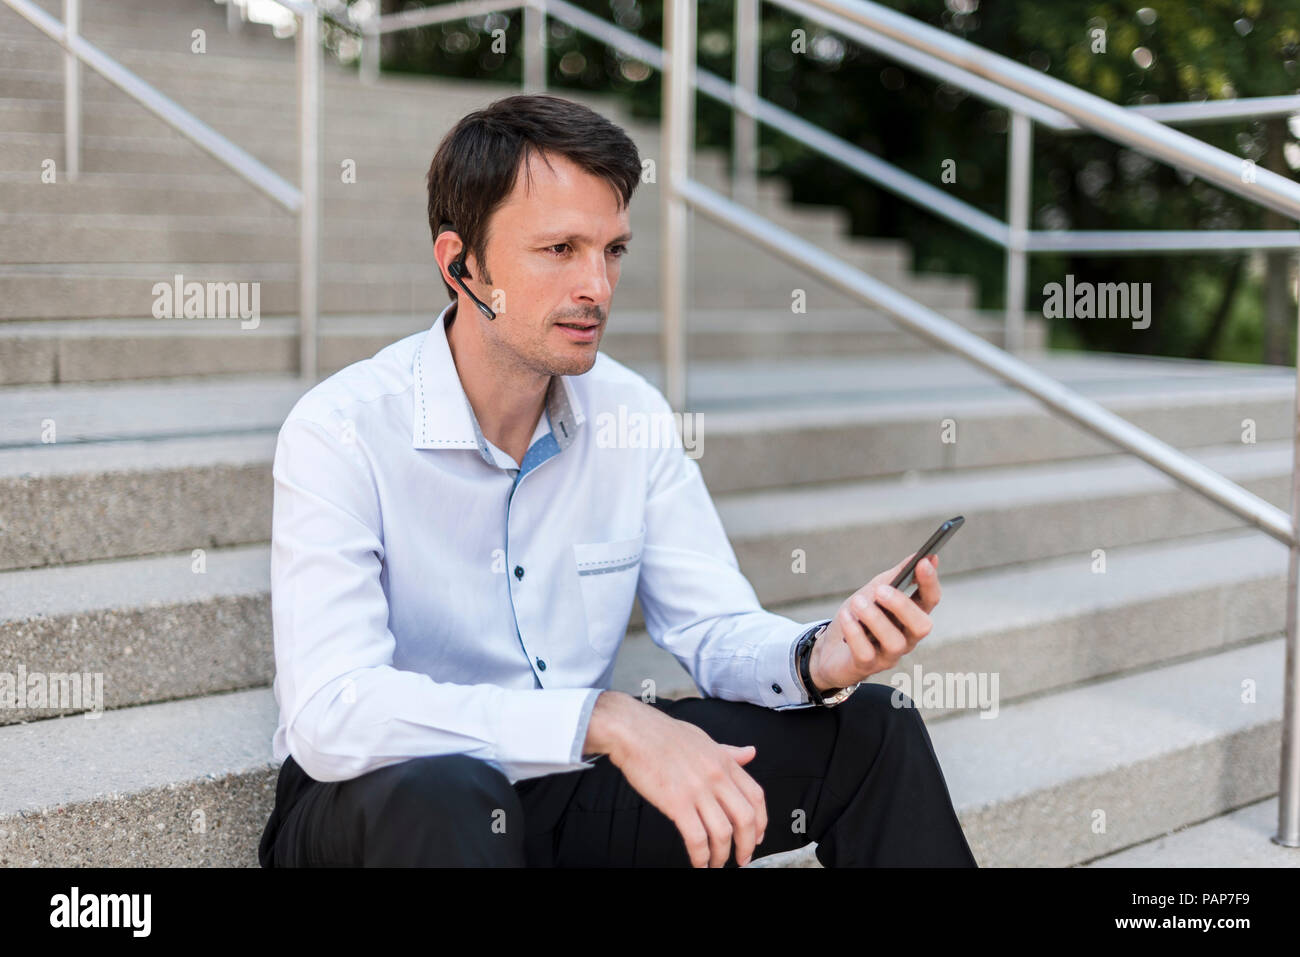 Businessman with headset and cellphone sitting on stairs Stock Photo